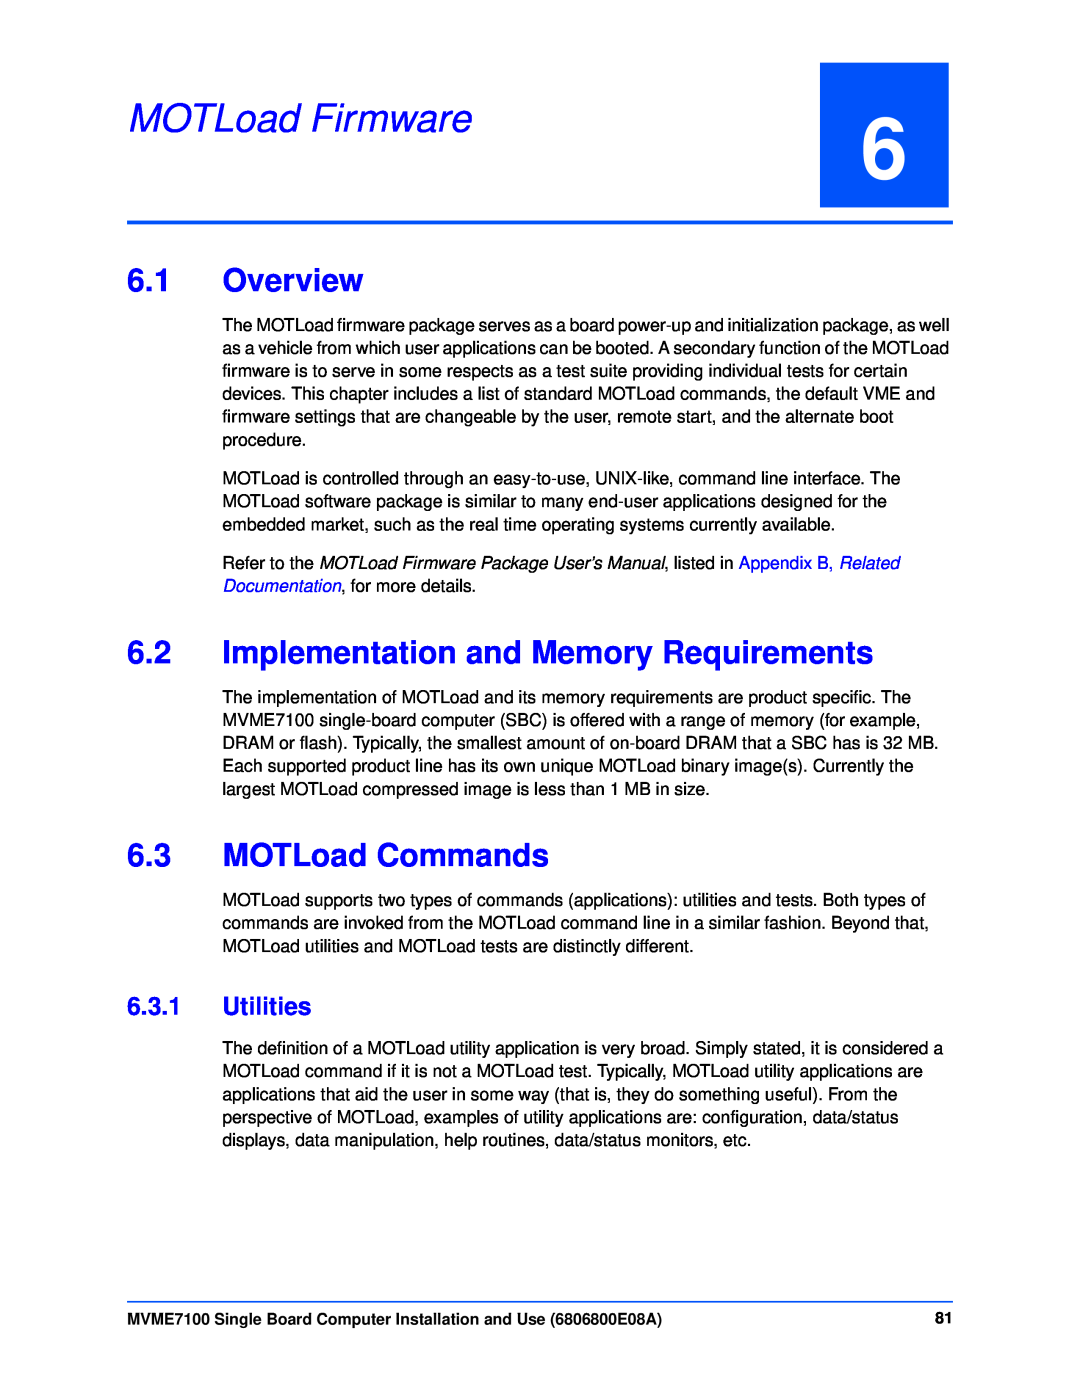 Emerson MVME7100 manual MOTLoad Firmware, Overview, Implementation and Memory Requirements, MOTLoad Commands, Utilities 